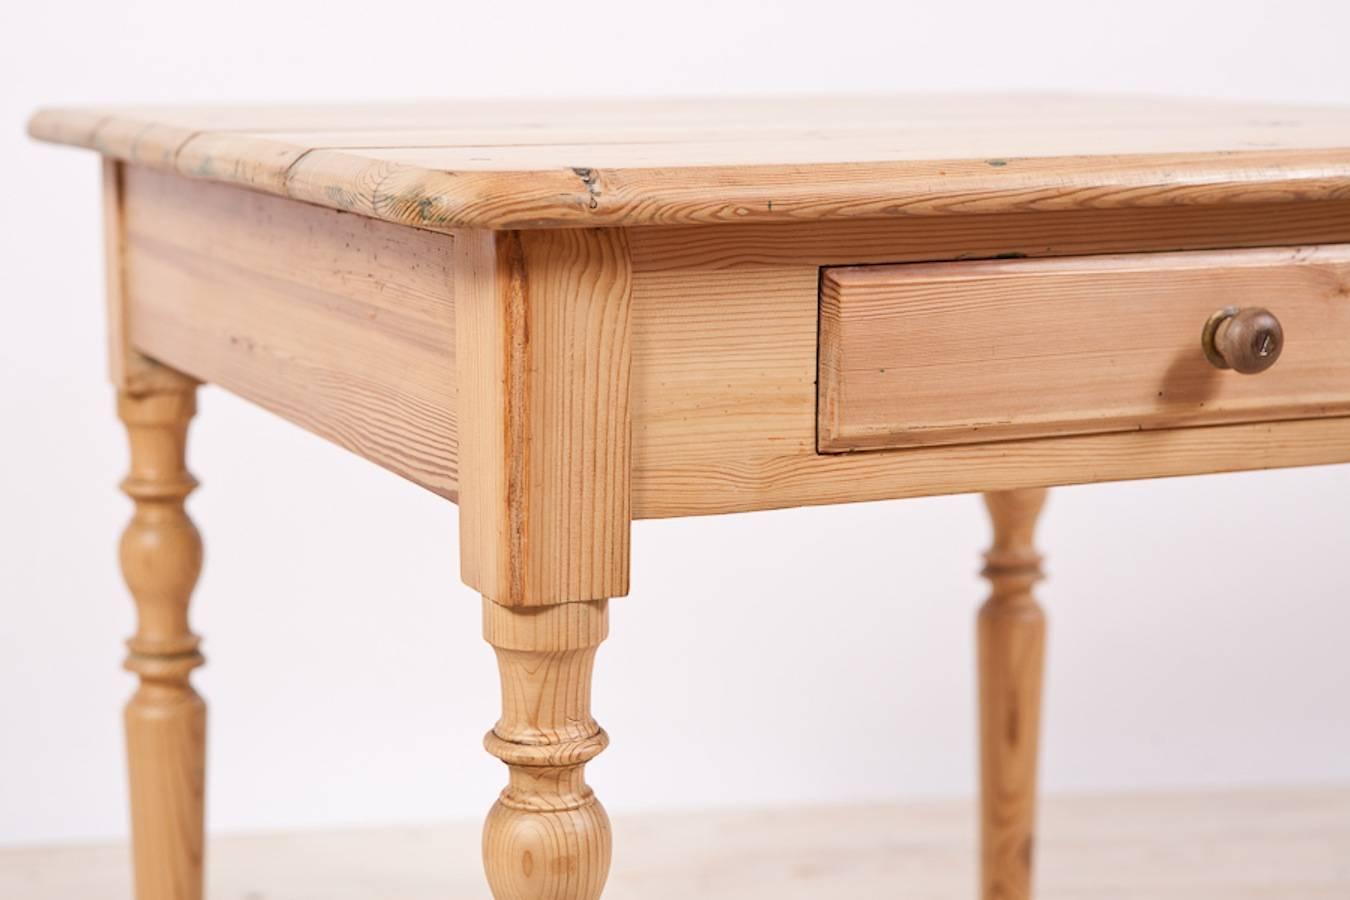 Country German Side Table in Pine with Turned Legs and Drawer, circa 1850